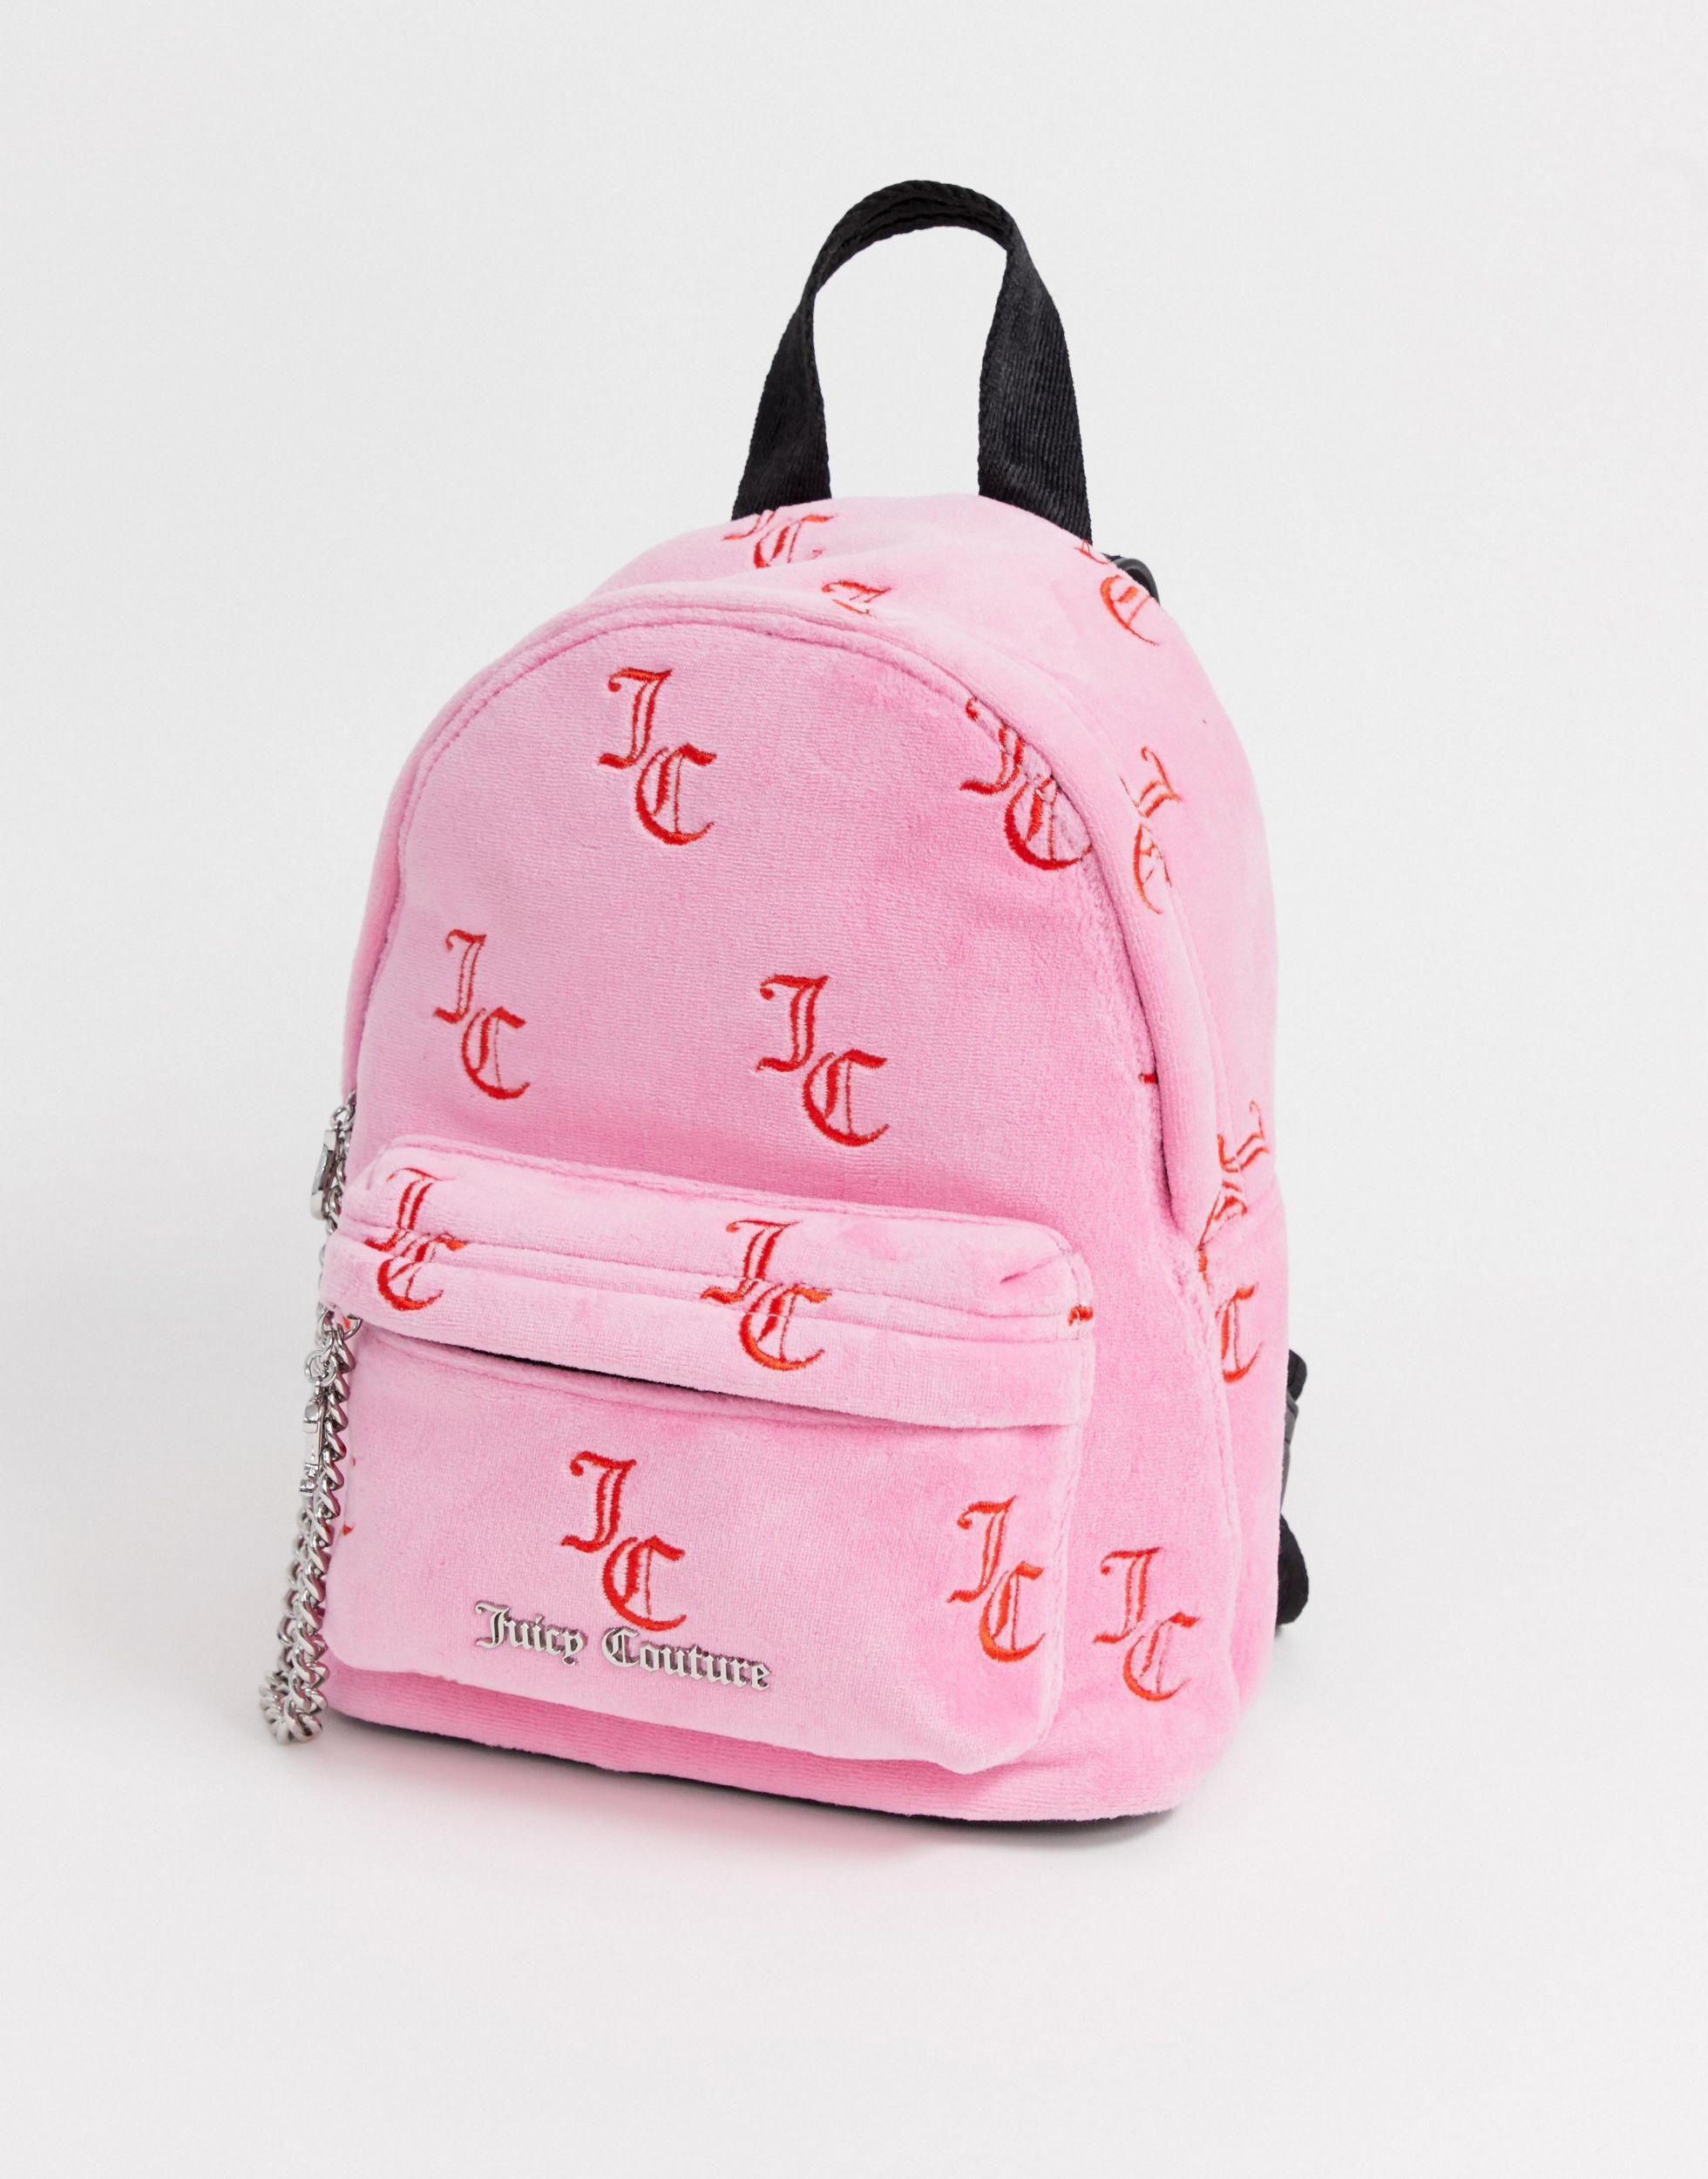 Juicy Couture Juicy Black Label Delta Mini Backpack in Pink | Lyst UK